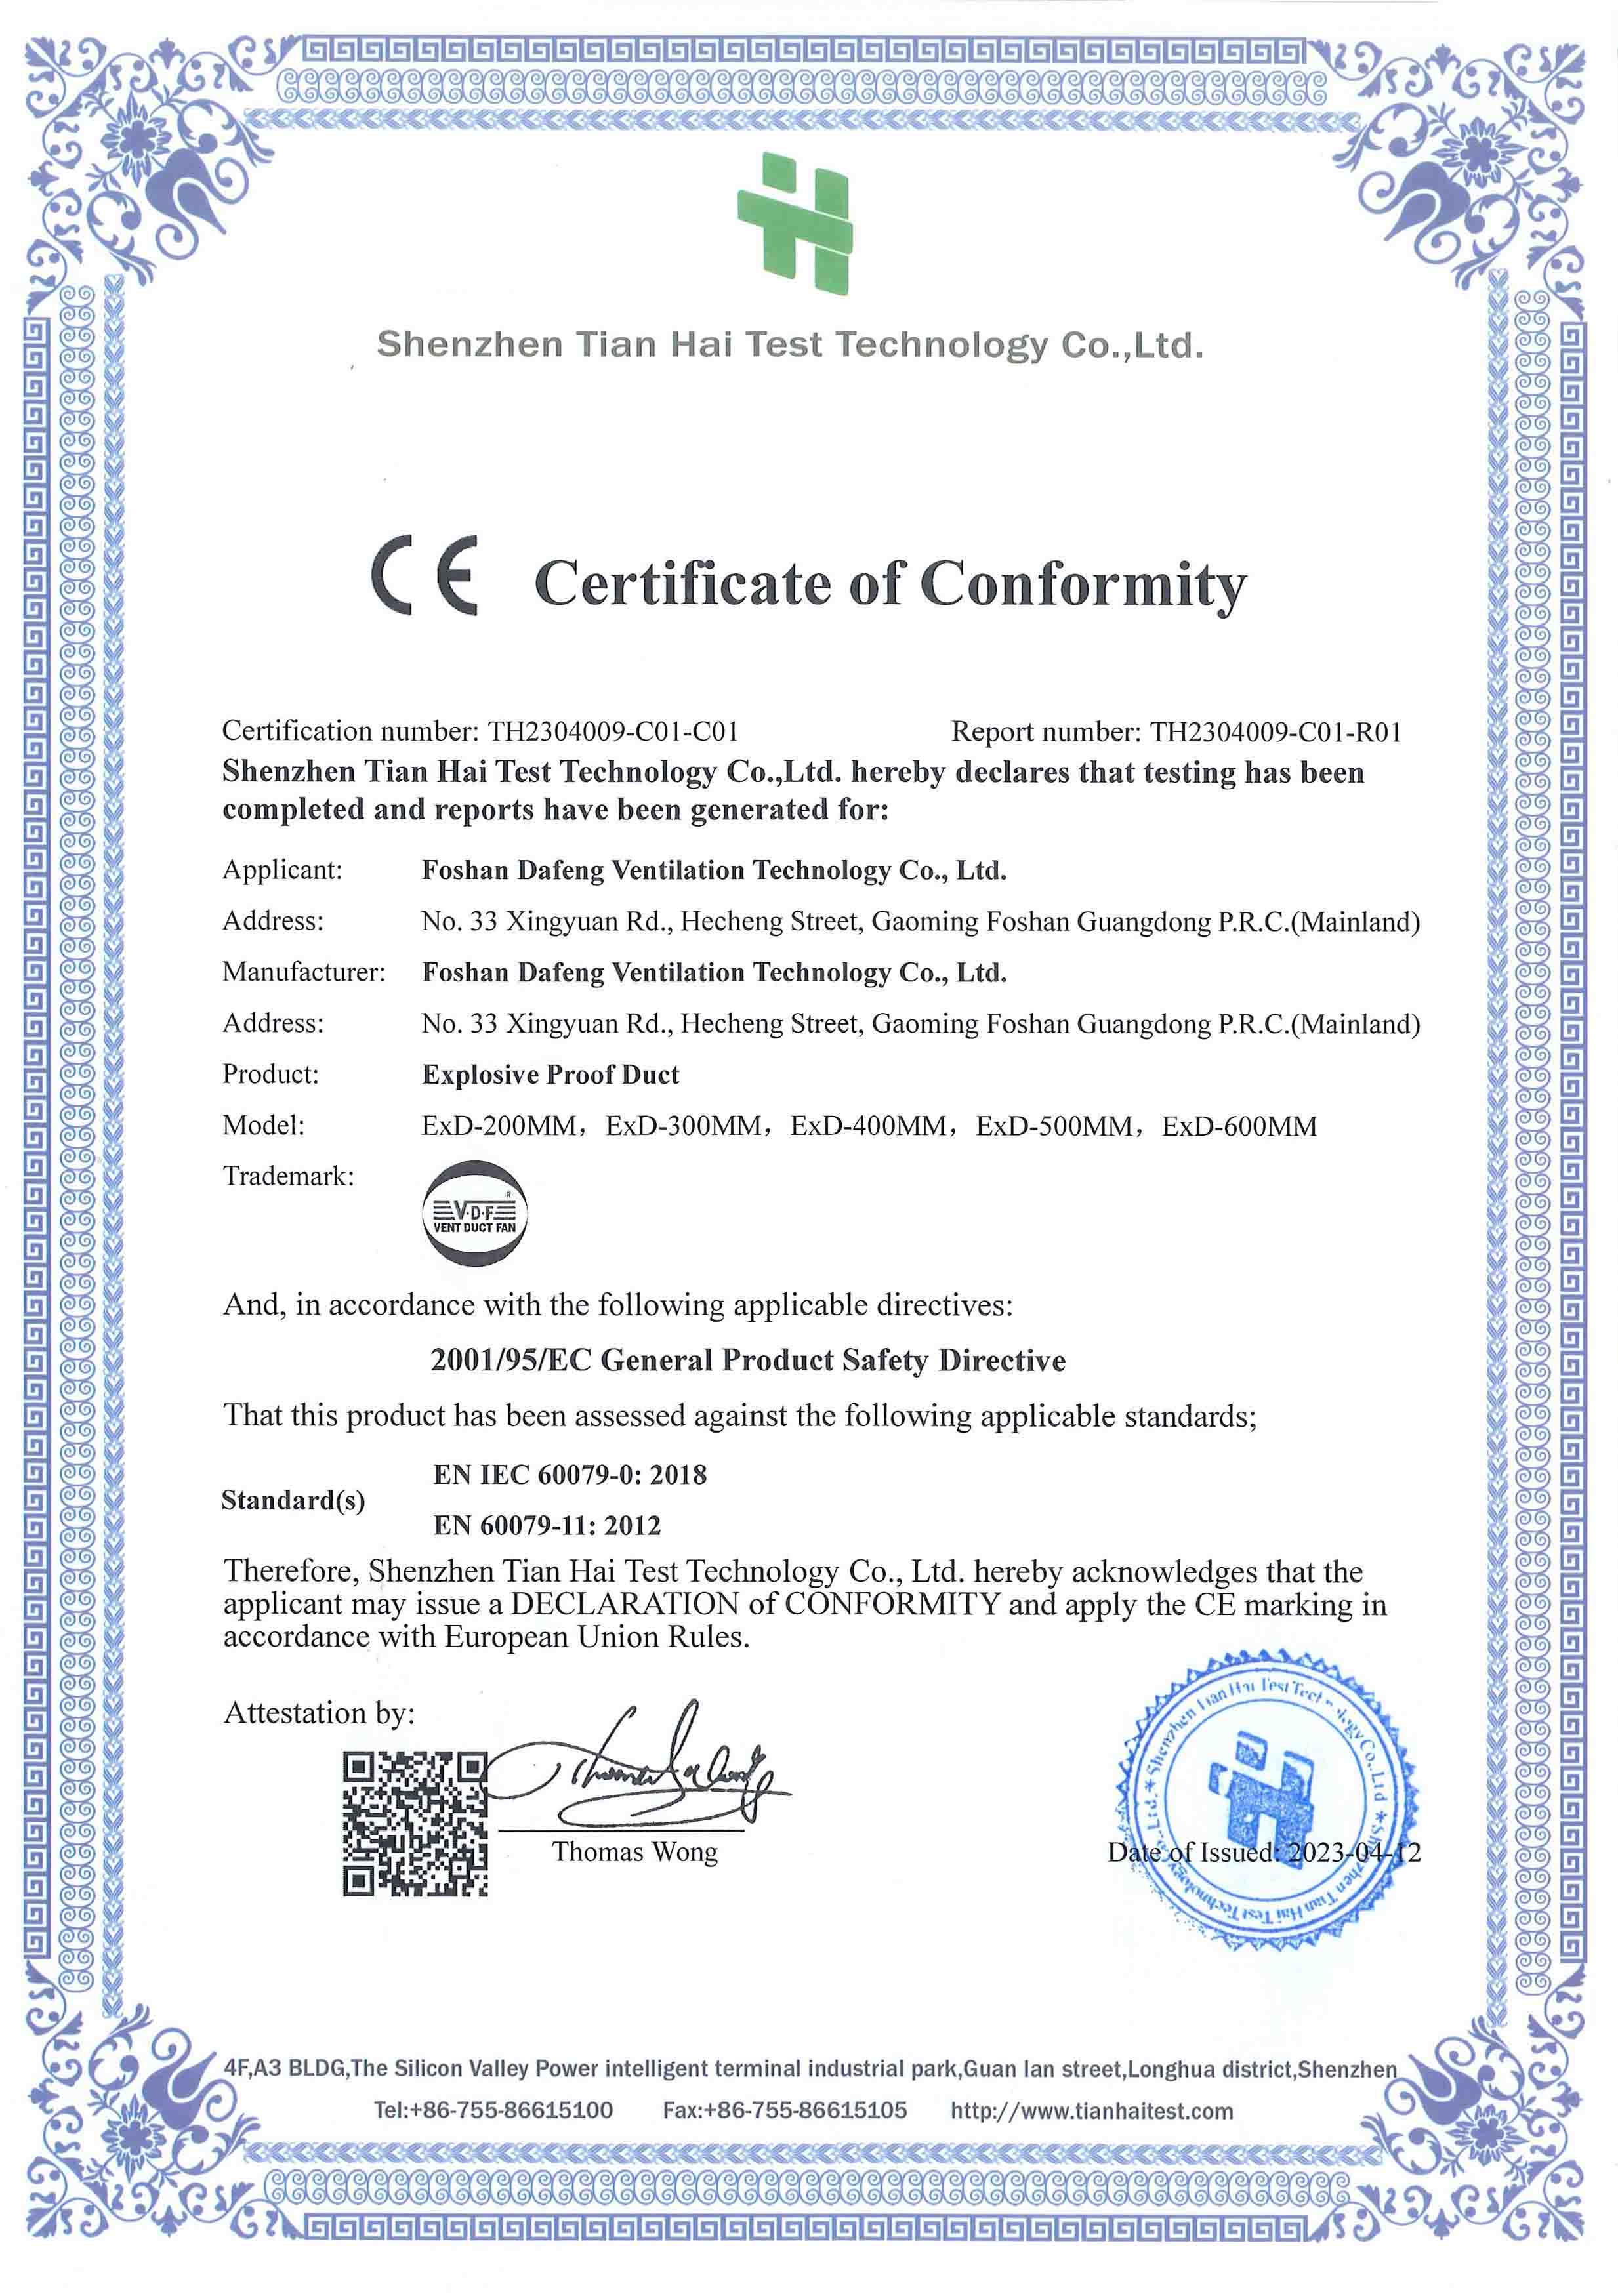 CE Certificated for Explosion Proof Duct